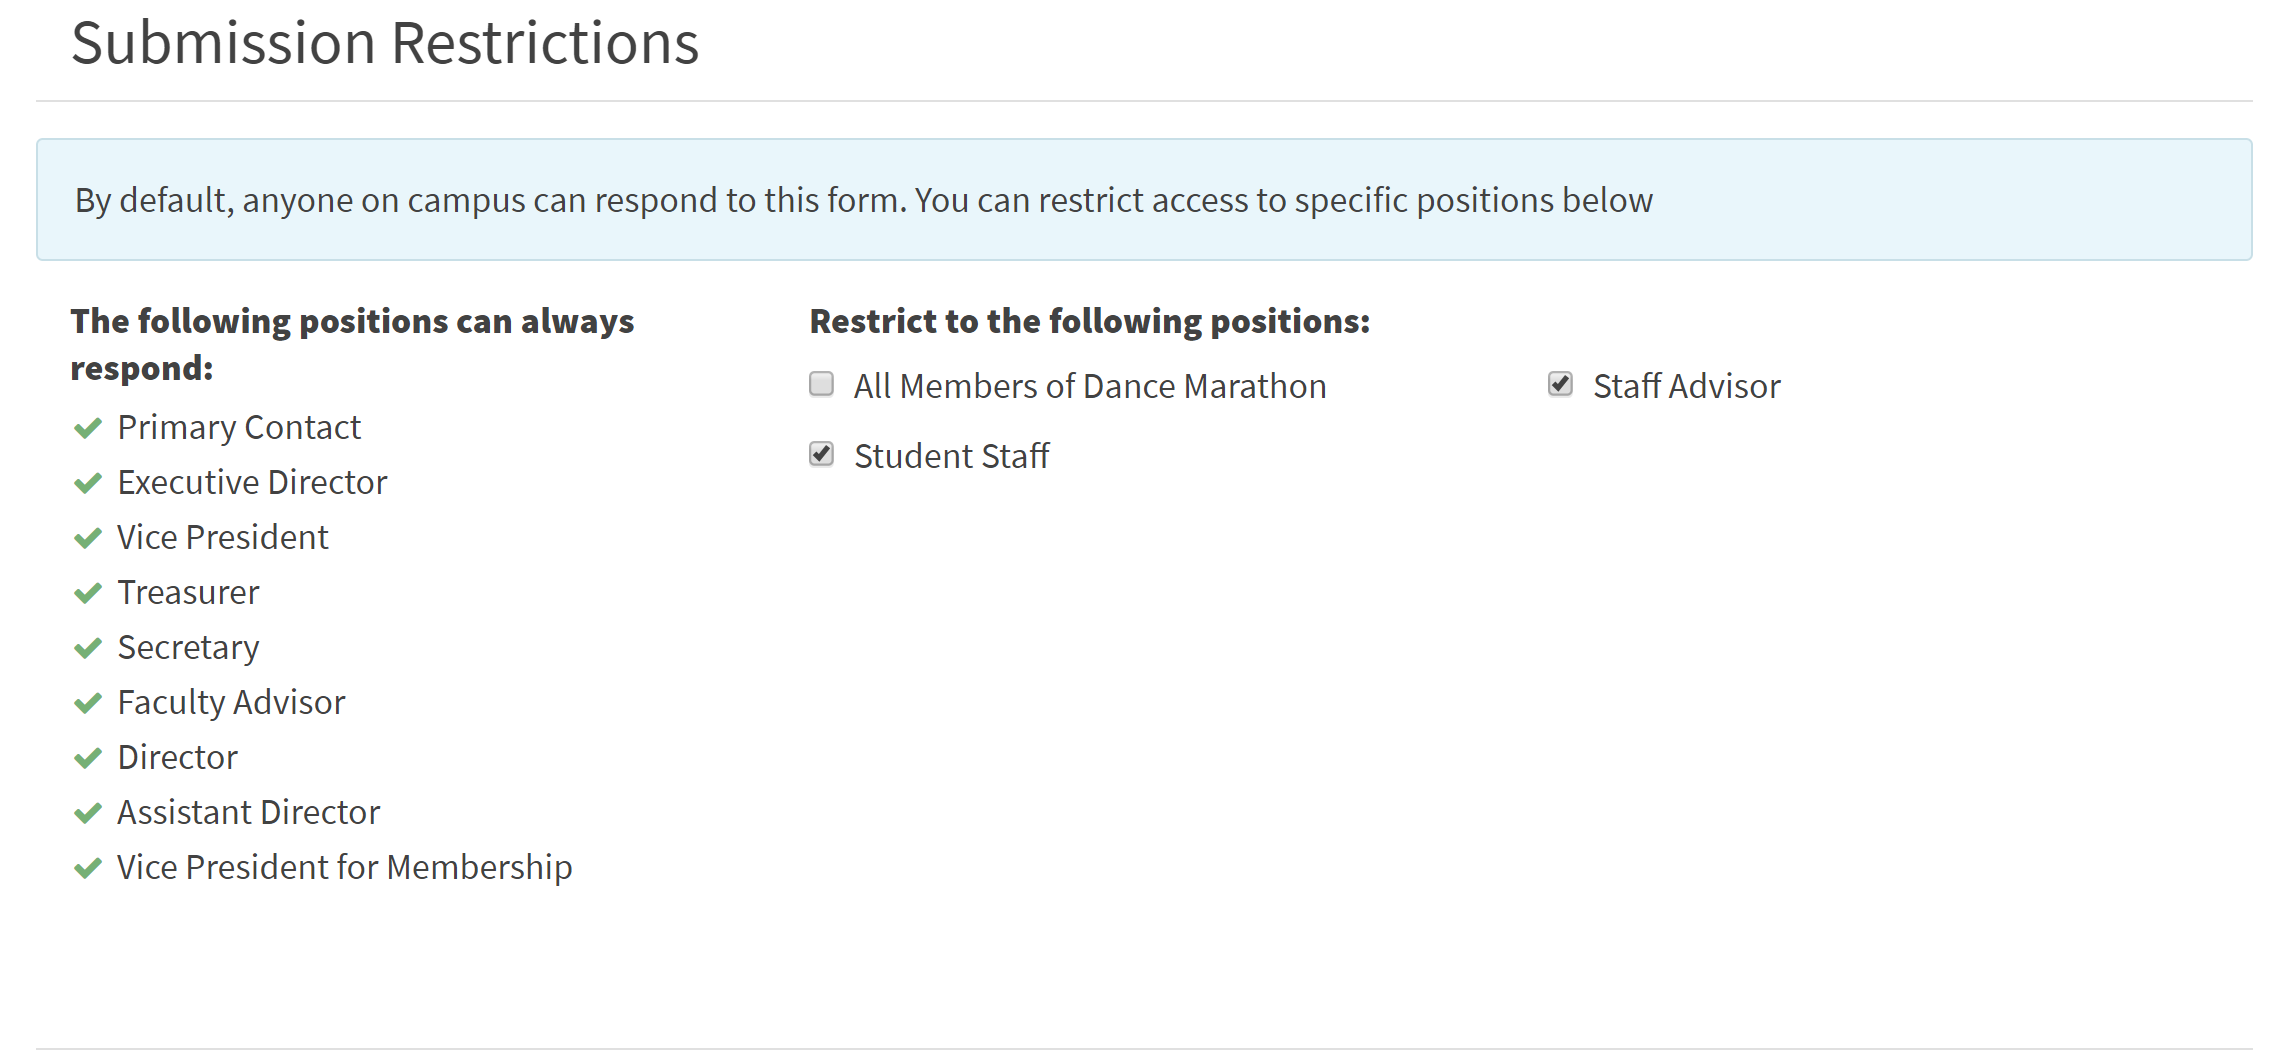 the screenshot shows an organization form's submission restrictions section with staff advisor and student staff checked off